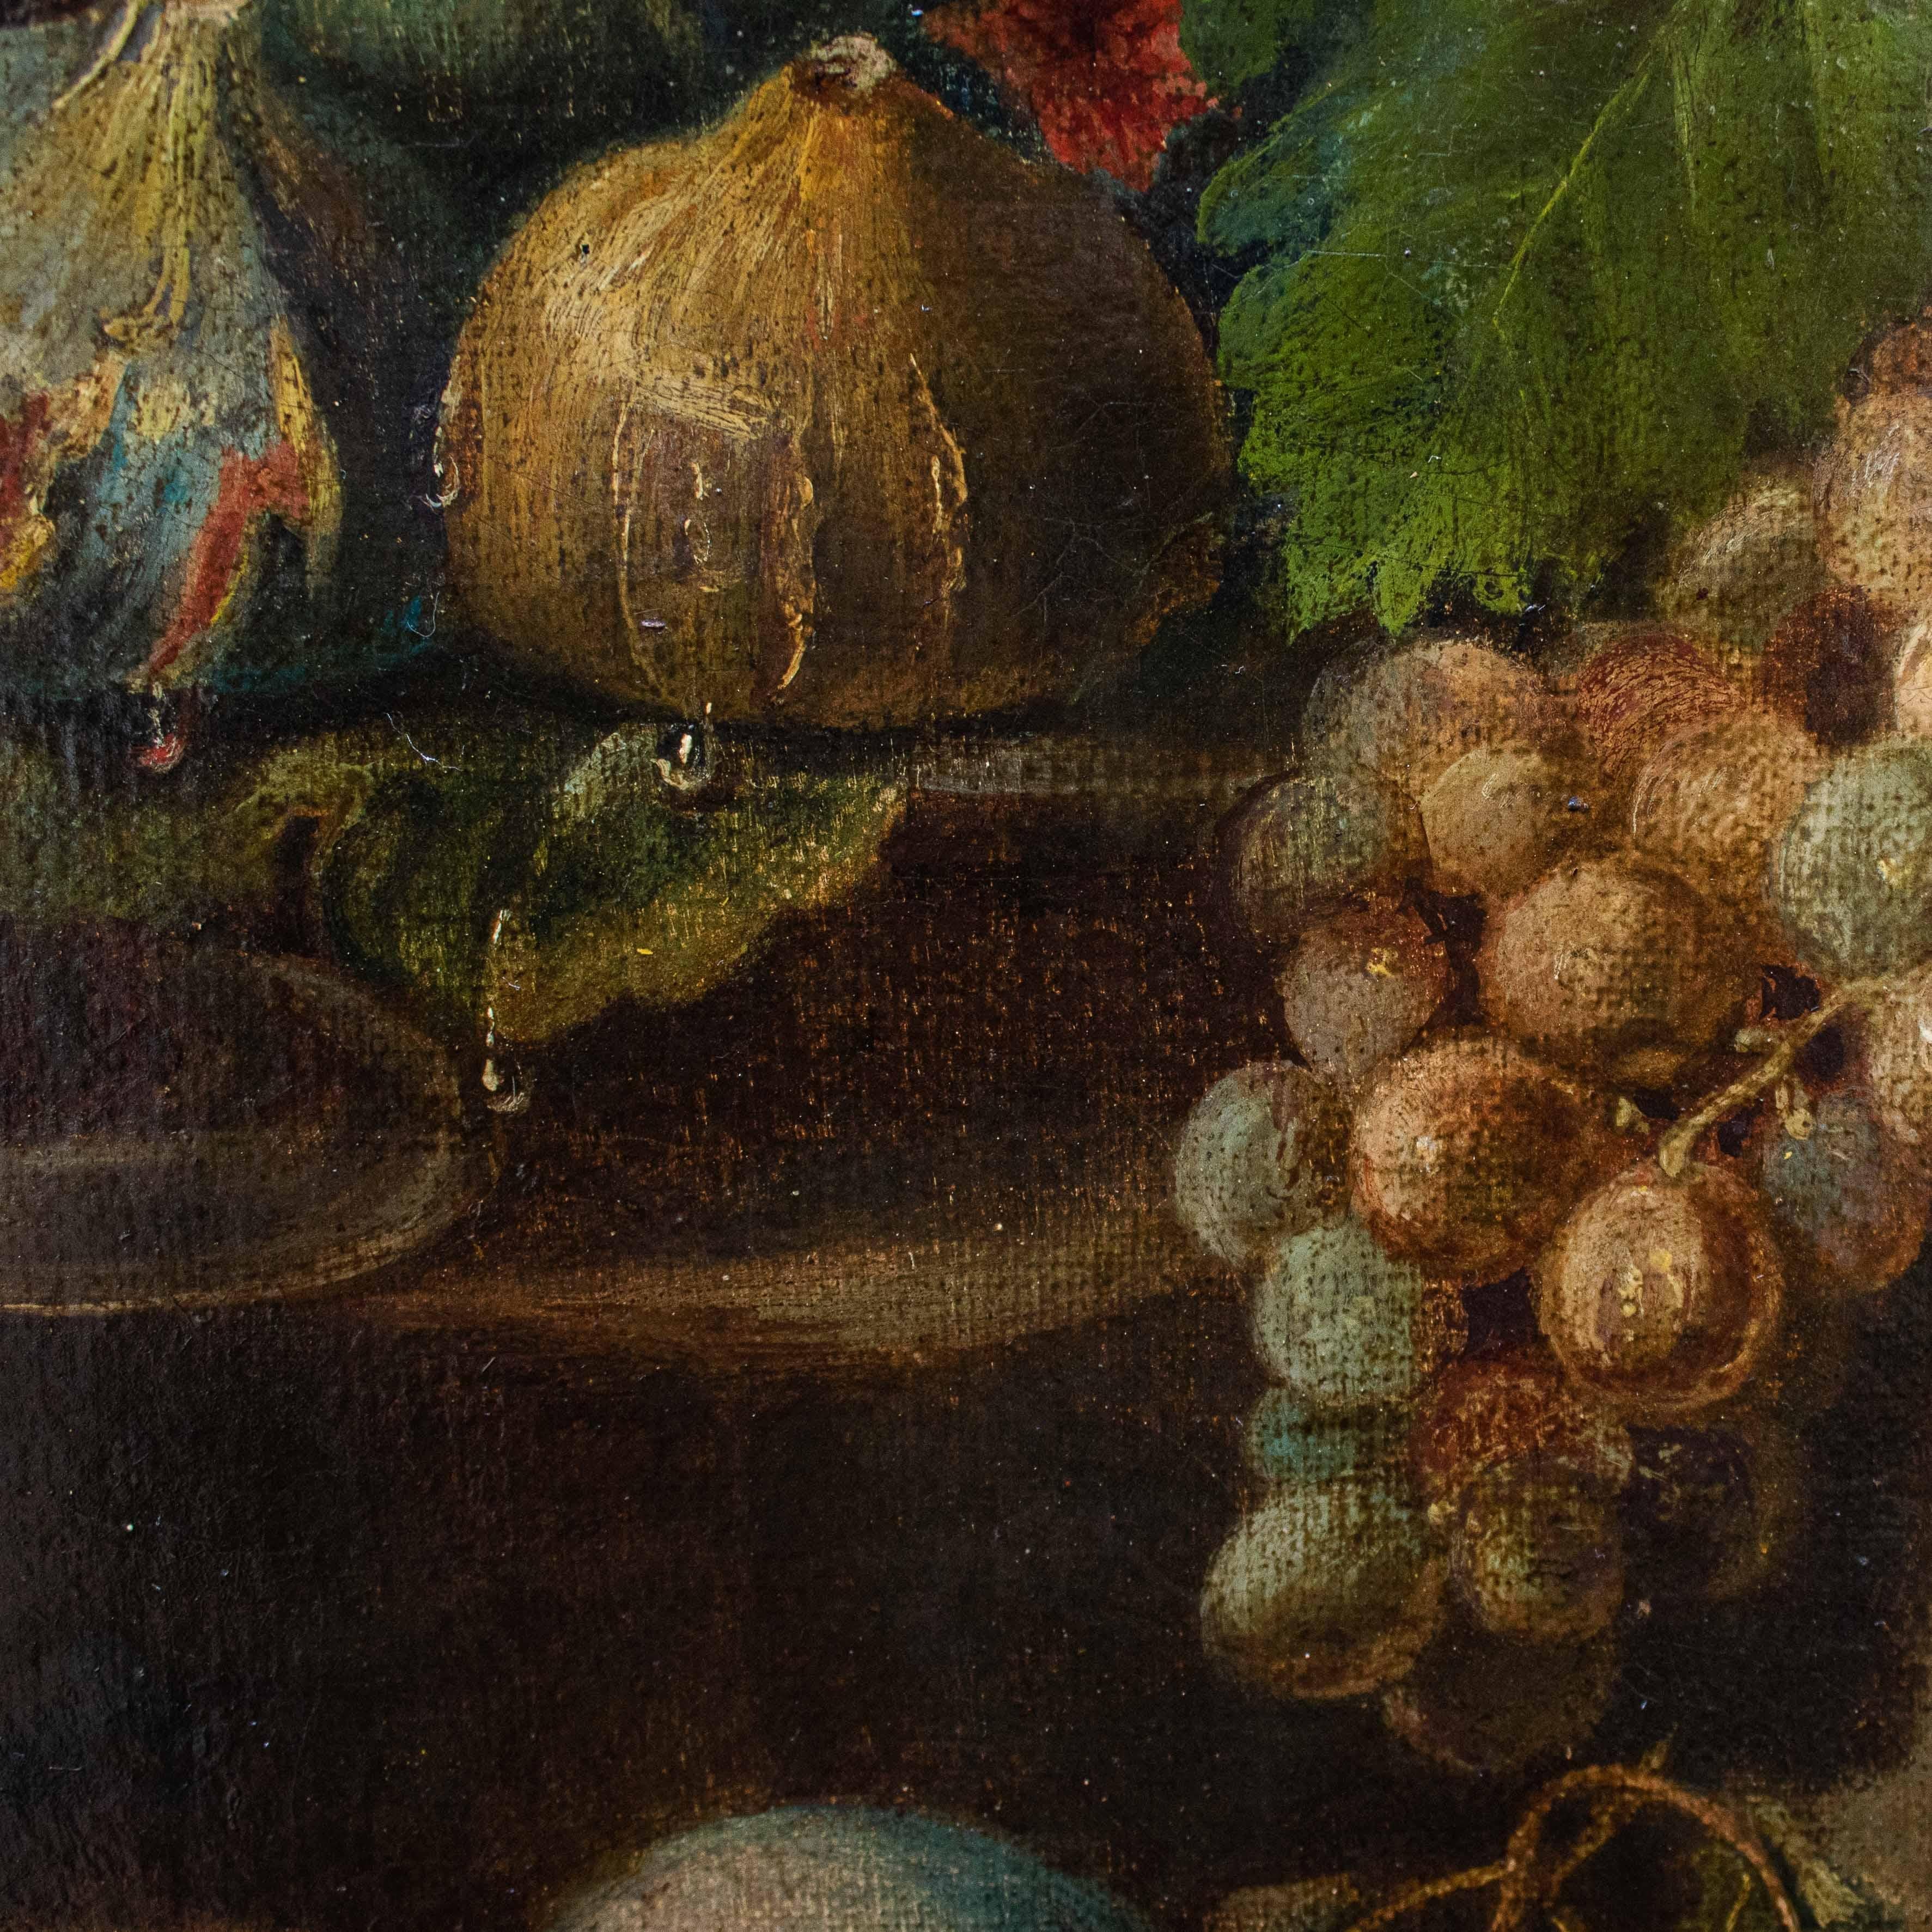 Italian 18th Century Still Life with Fruits and Bisquits Painting Oil on Canvas For Sale